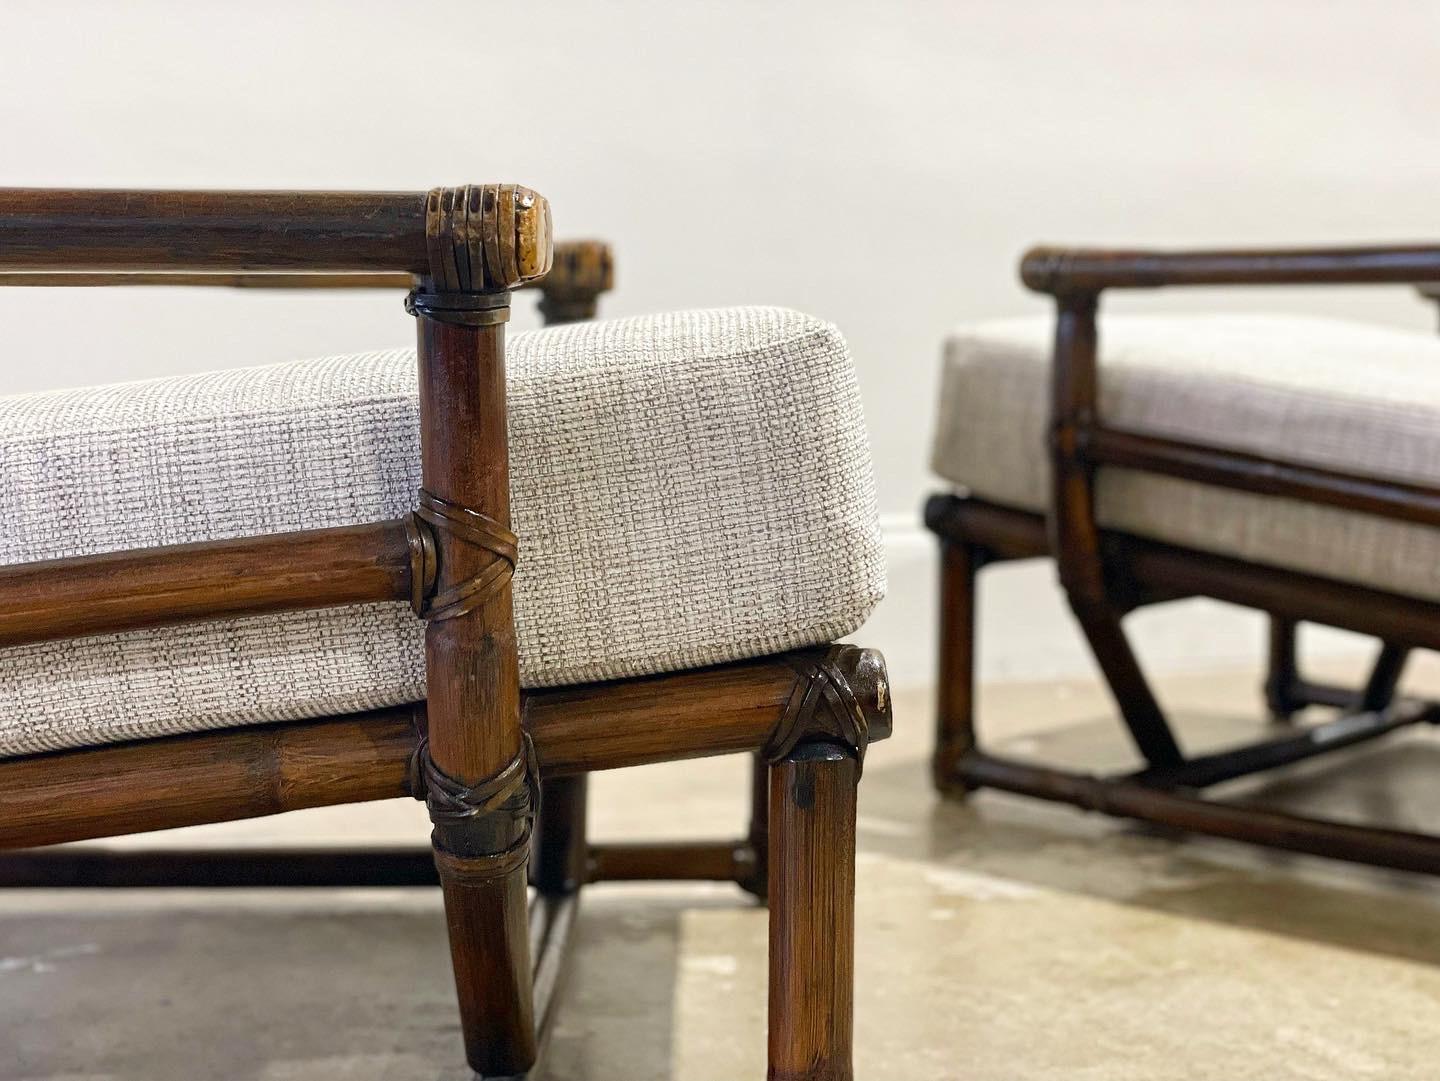 Pair of substantial mid century organic modern bamboo rattan lounge chairs by McGuire, circa 1963. Rawhide leather strapping joinery and end caps. Exquisite craftsmanship and top notch materials. Set includes two lounge chairs. Brass McGuire